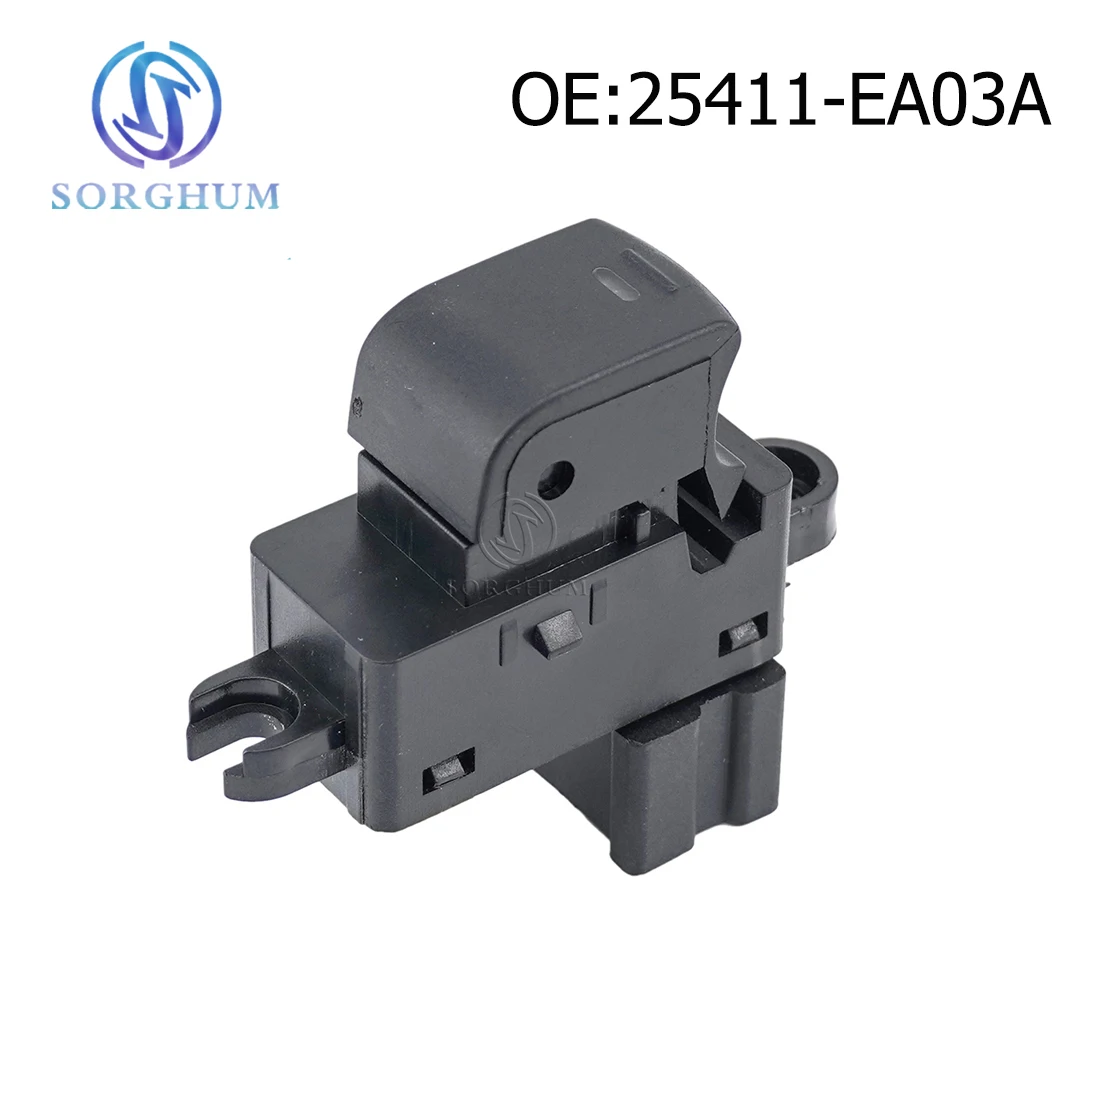 

Sorghum 25411-EA00A Electric Power Window Switch Push Button For Nissan Murano Teana Qashqai Frontier Pathfinder R51 Xterra